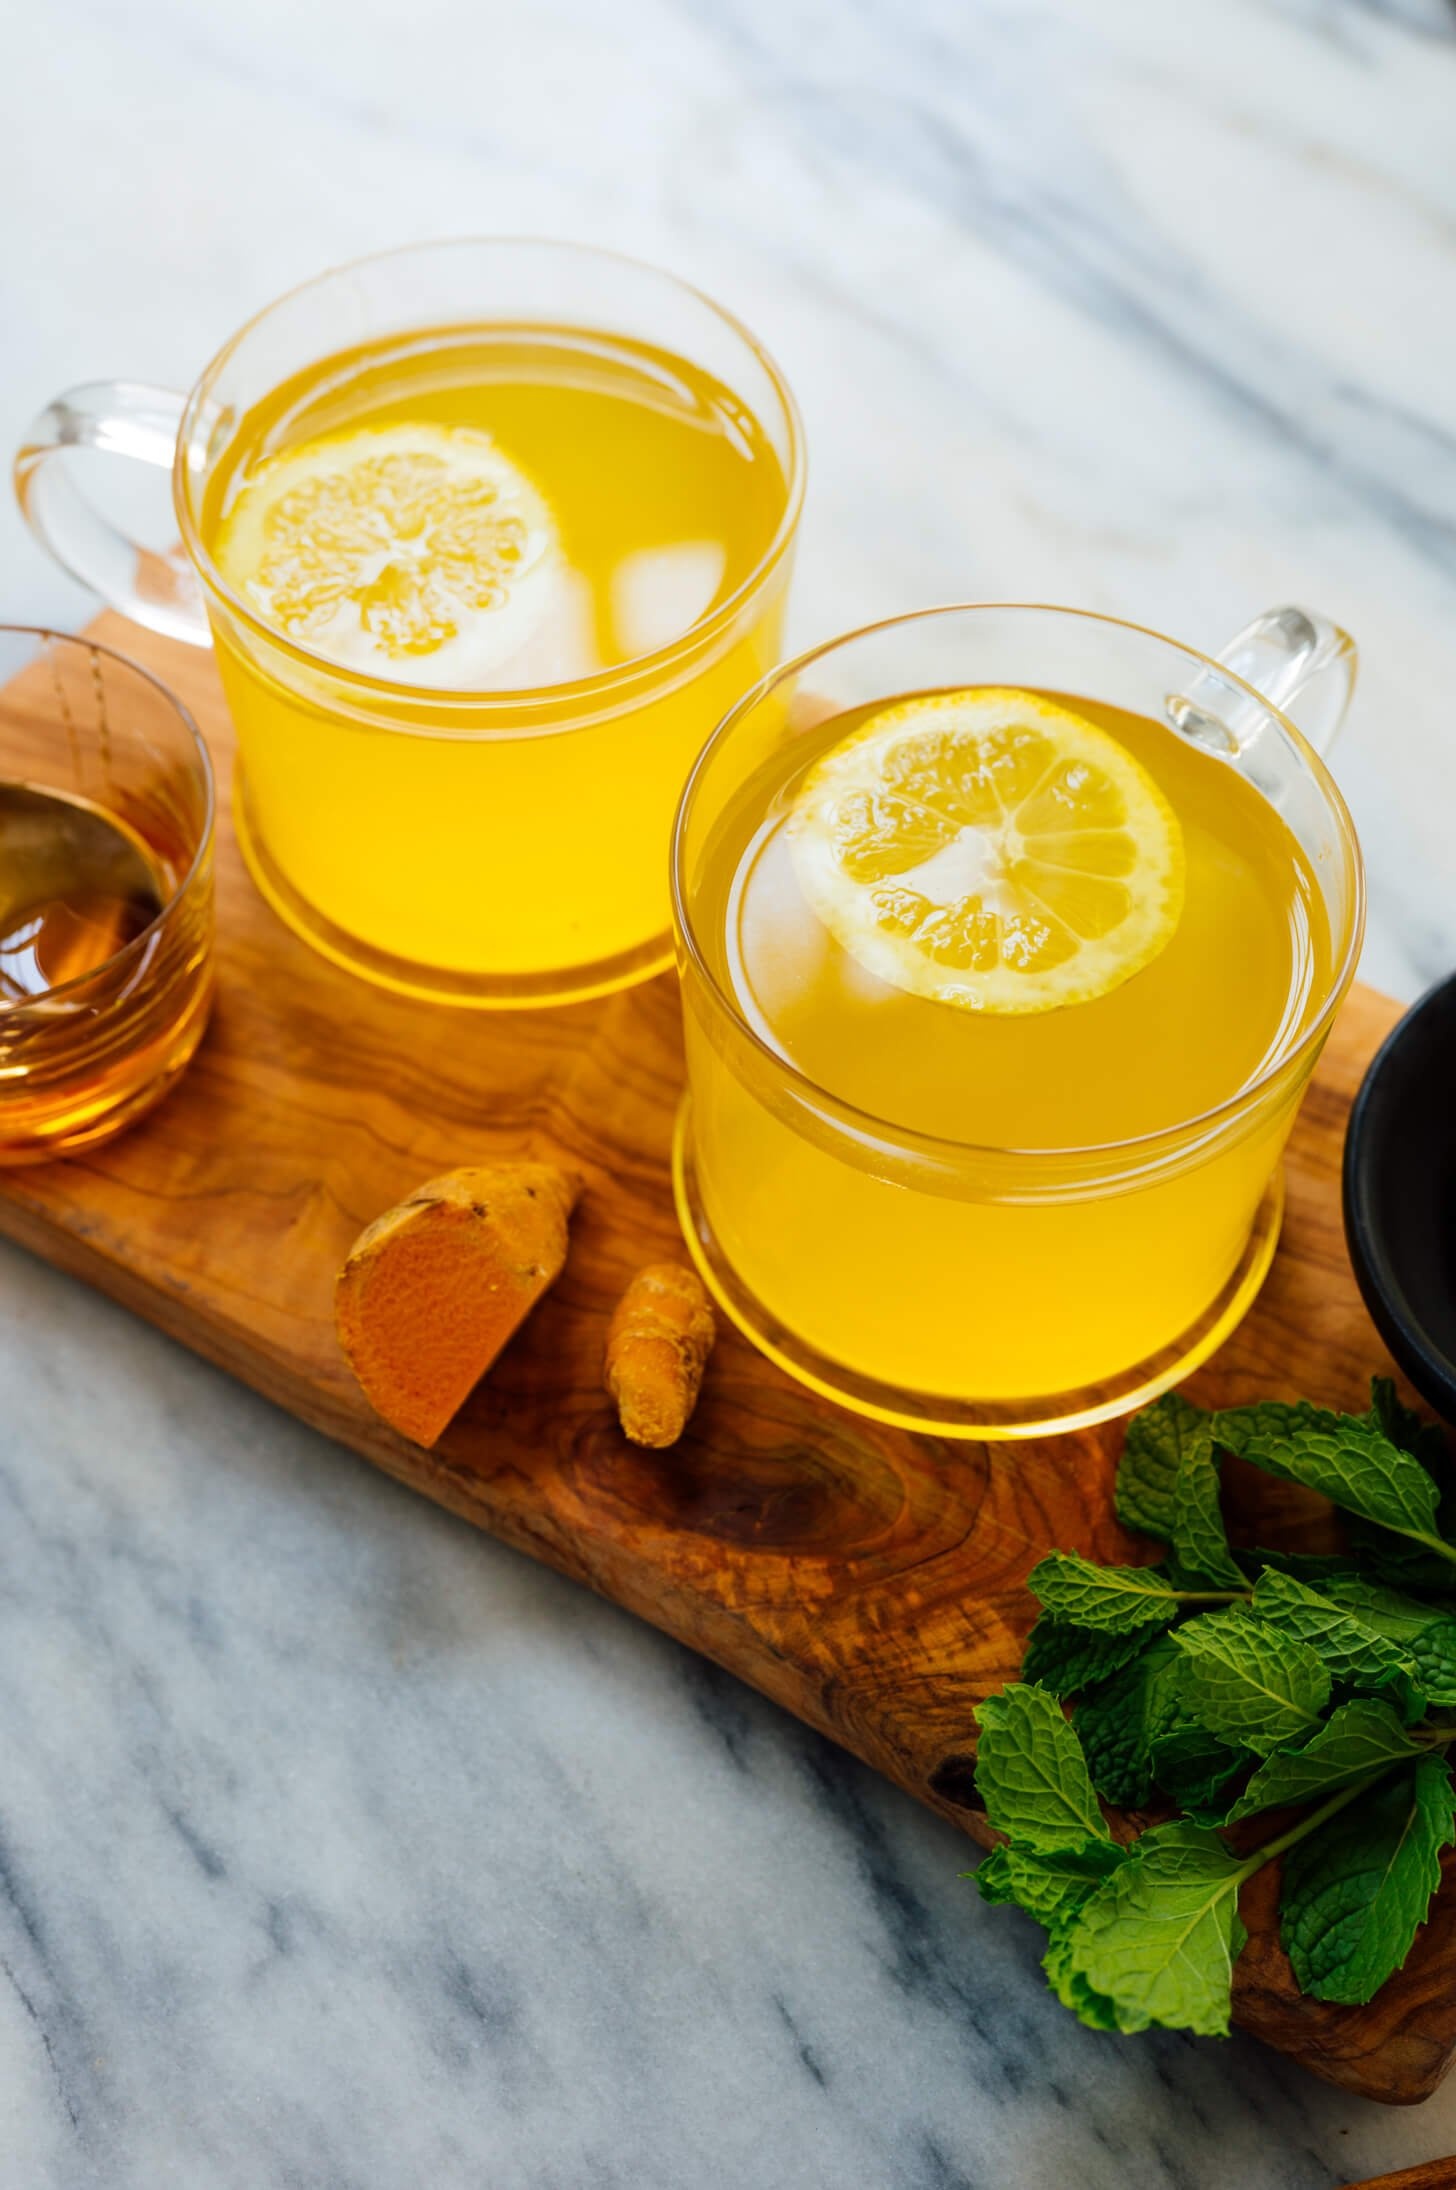 Tea: Turmeric drink, A warm and soothing blend of ground turmeric, lemon juice, and honey. 1460x2190 HD Wallpaper.